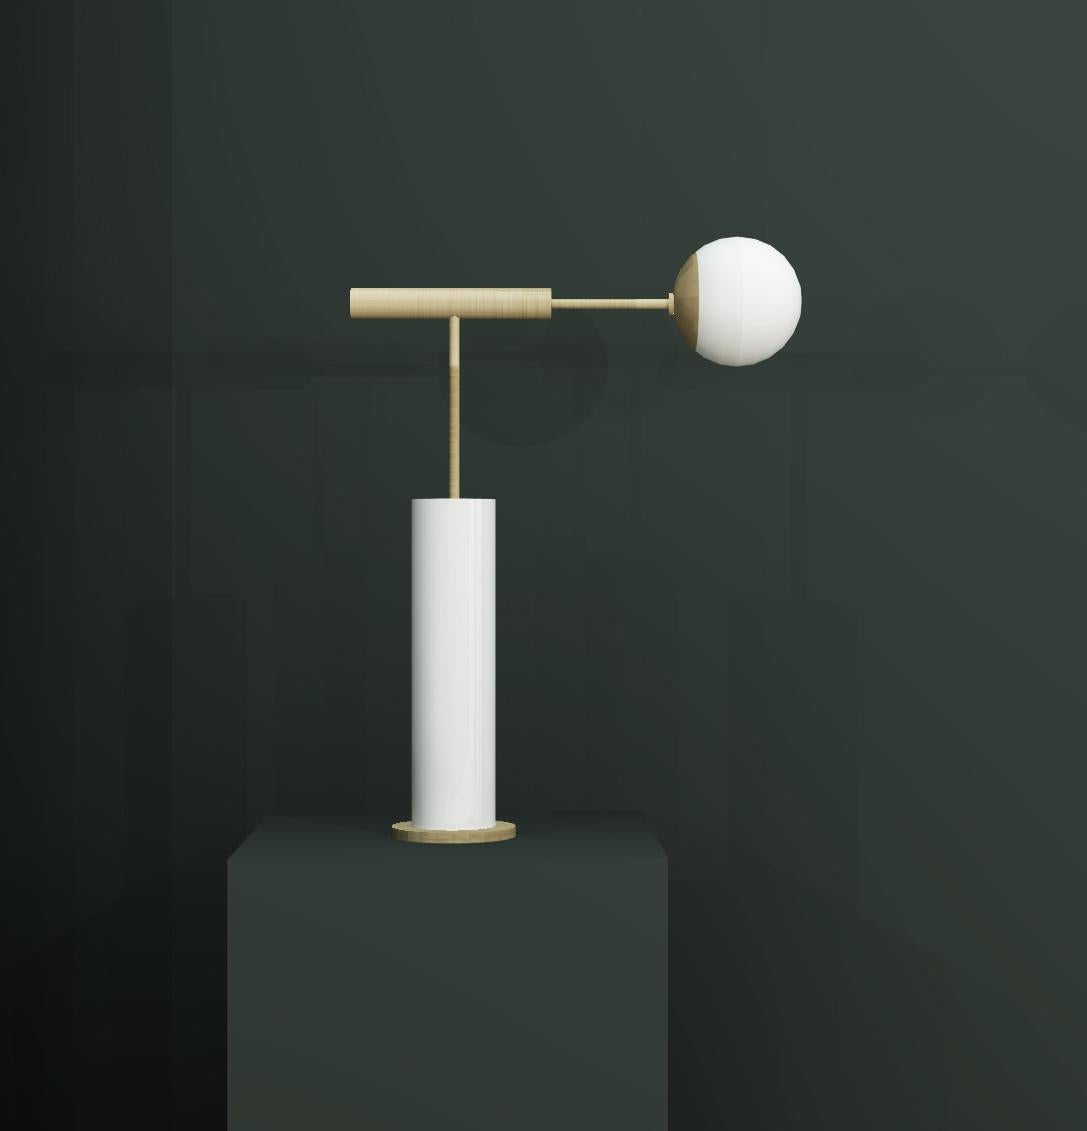 Design and crafted by world-renowned lighting brand Imagin, and inspired by architectural details and midcentury design, this table light is simple and bold. Using geometric language and limited materials, consistent, yet sophisticated compositional